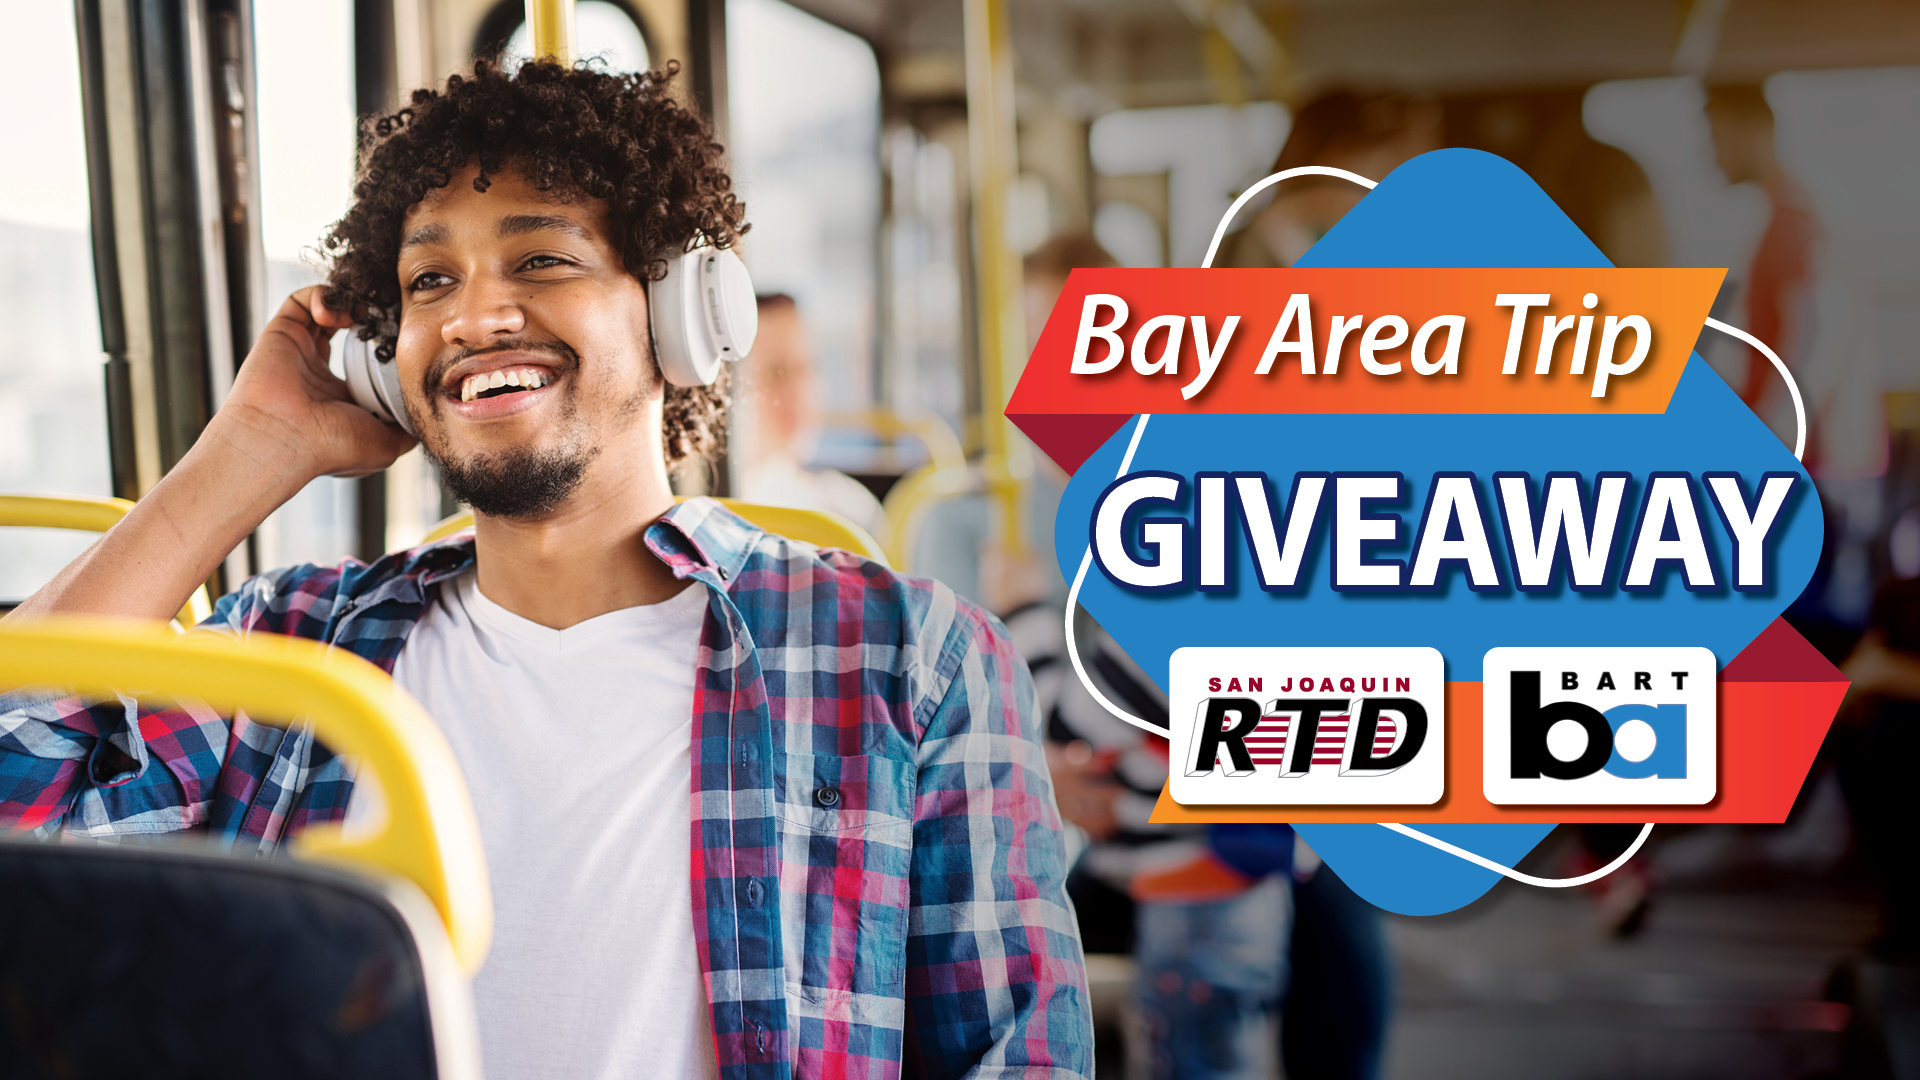 Image with text "Bay Area Trip Giveaway"